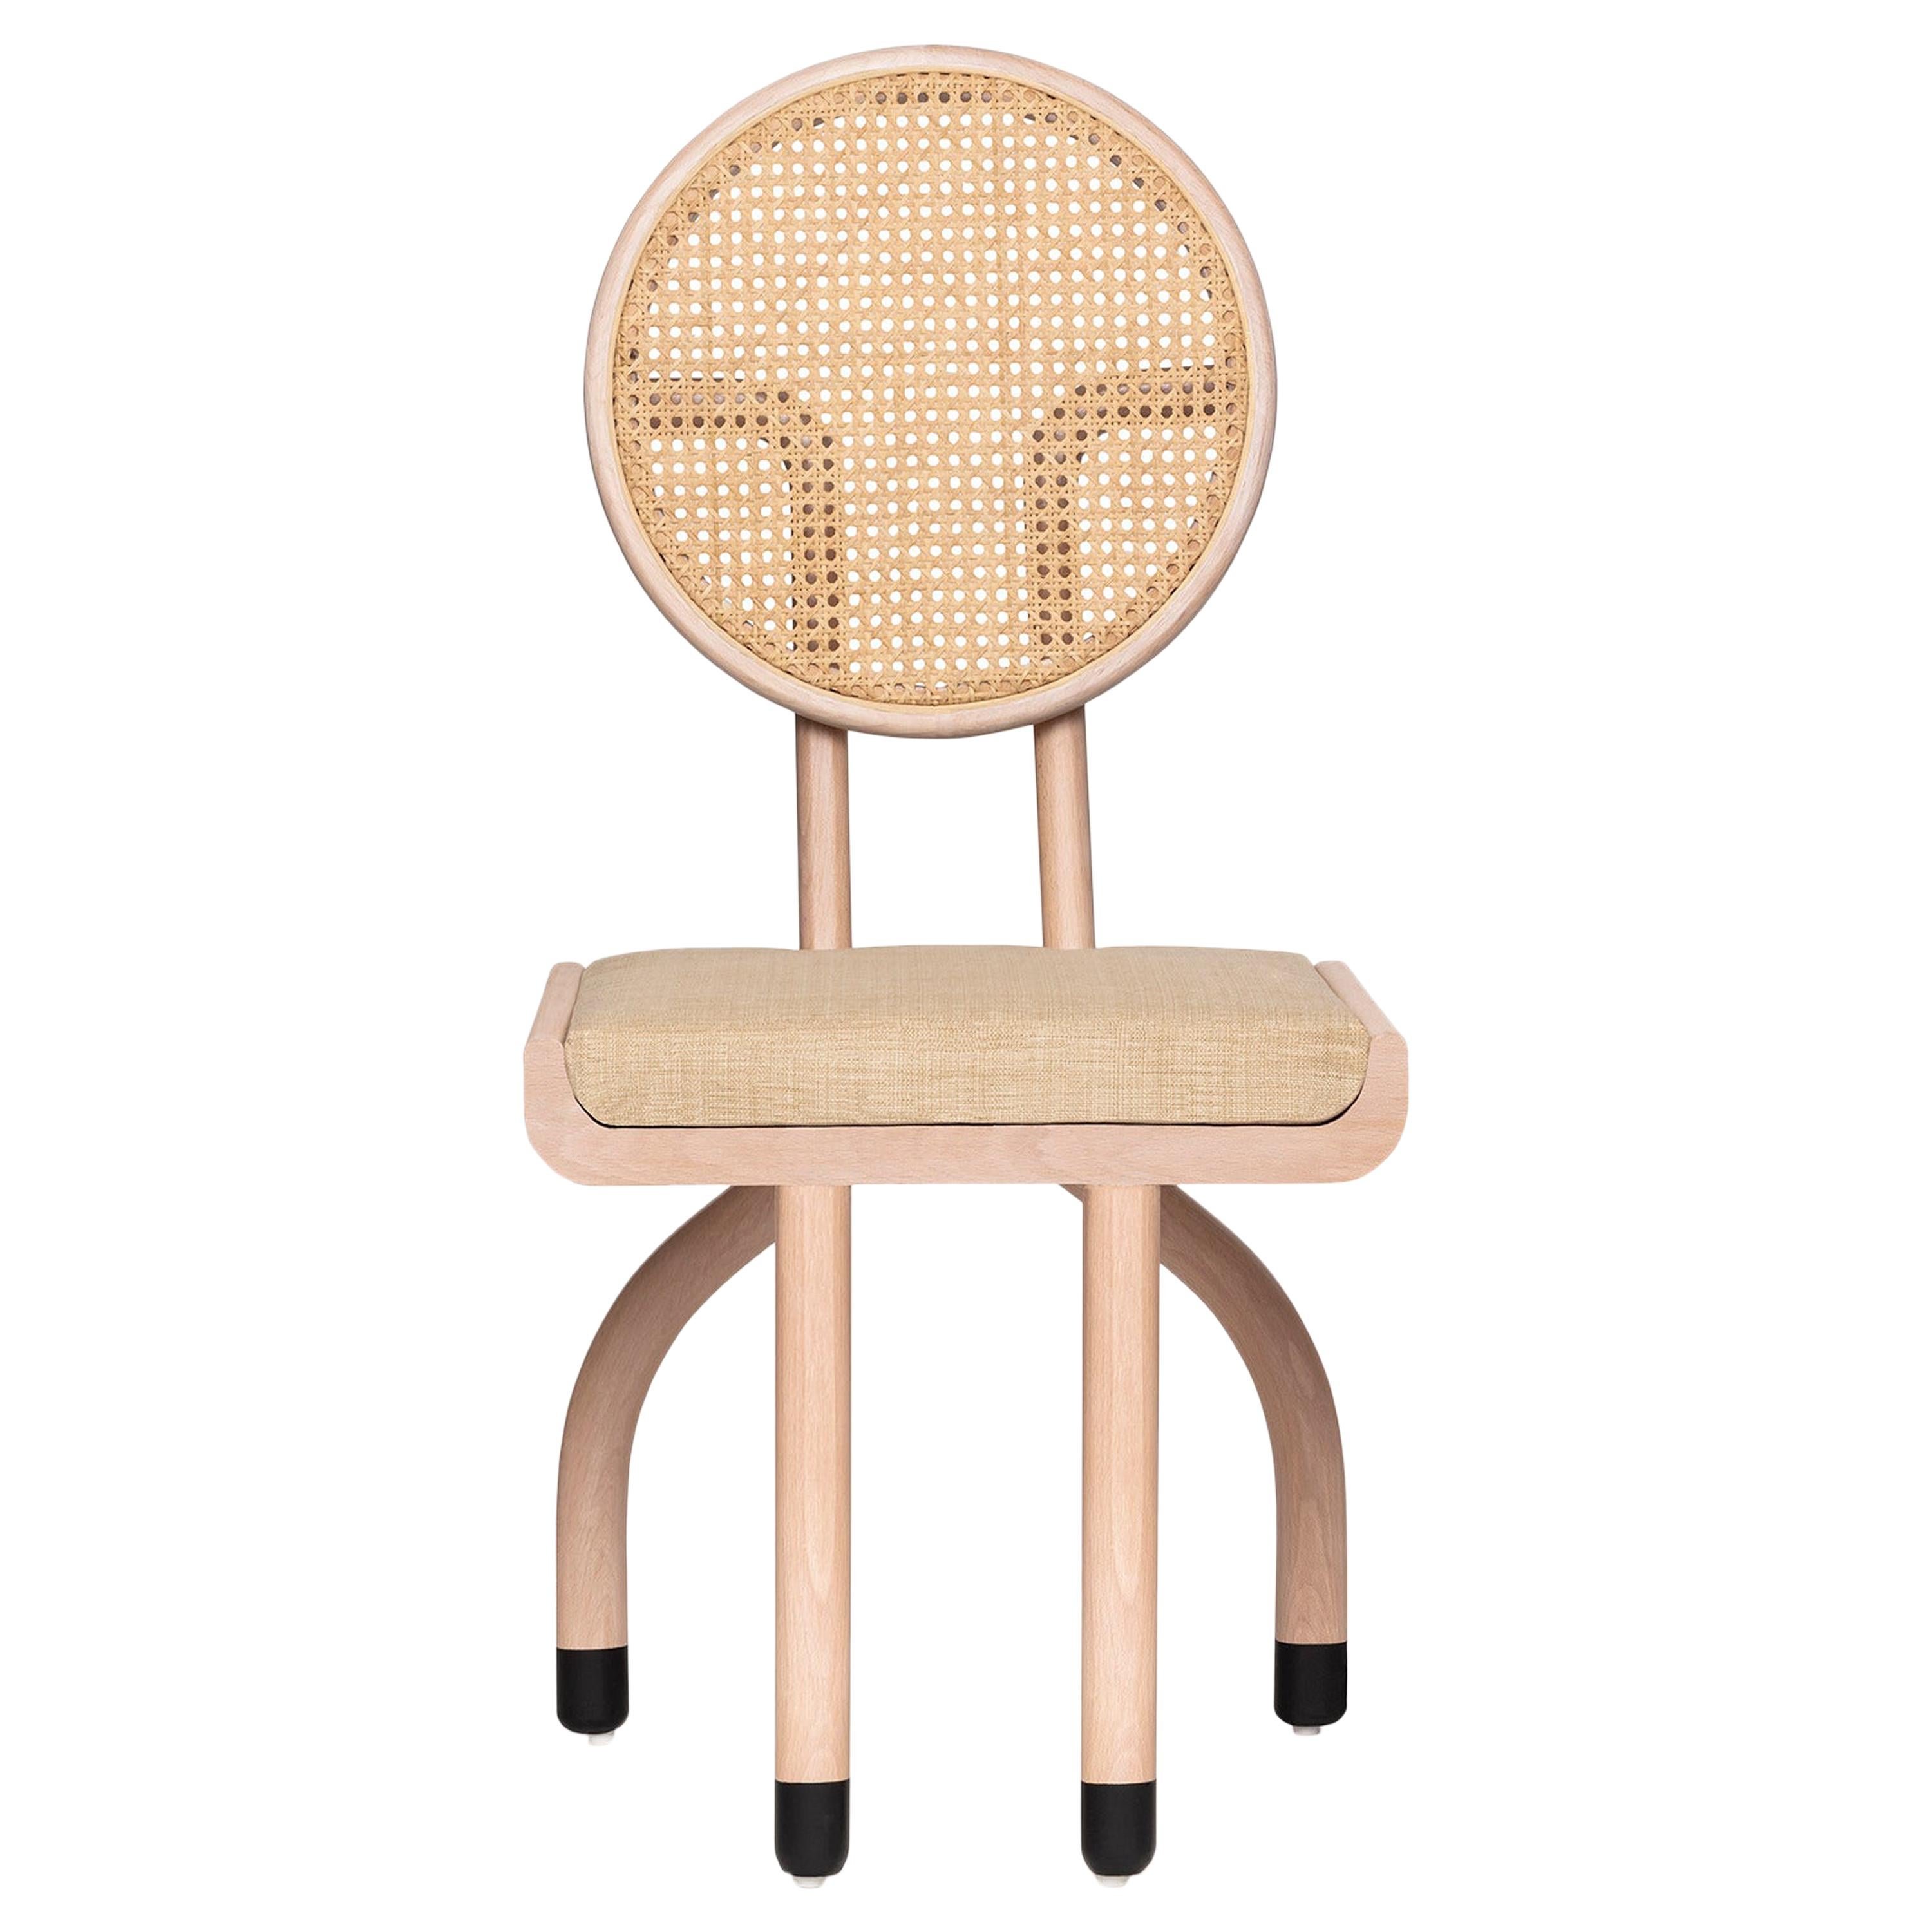 Mid-Century Modern Style Solid Minimal Wood Chair with Woven Cane Backboard